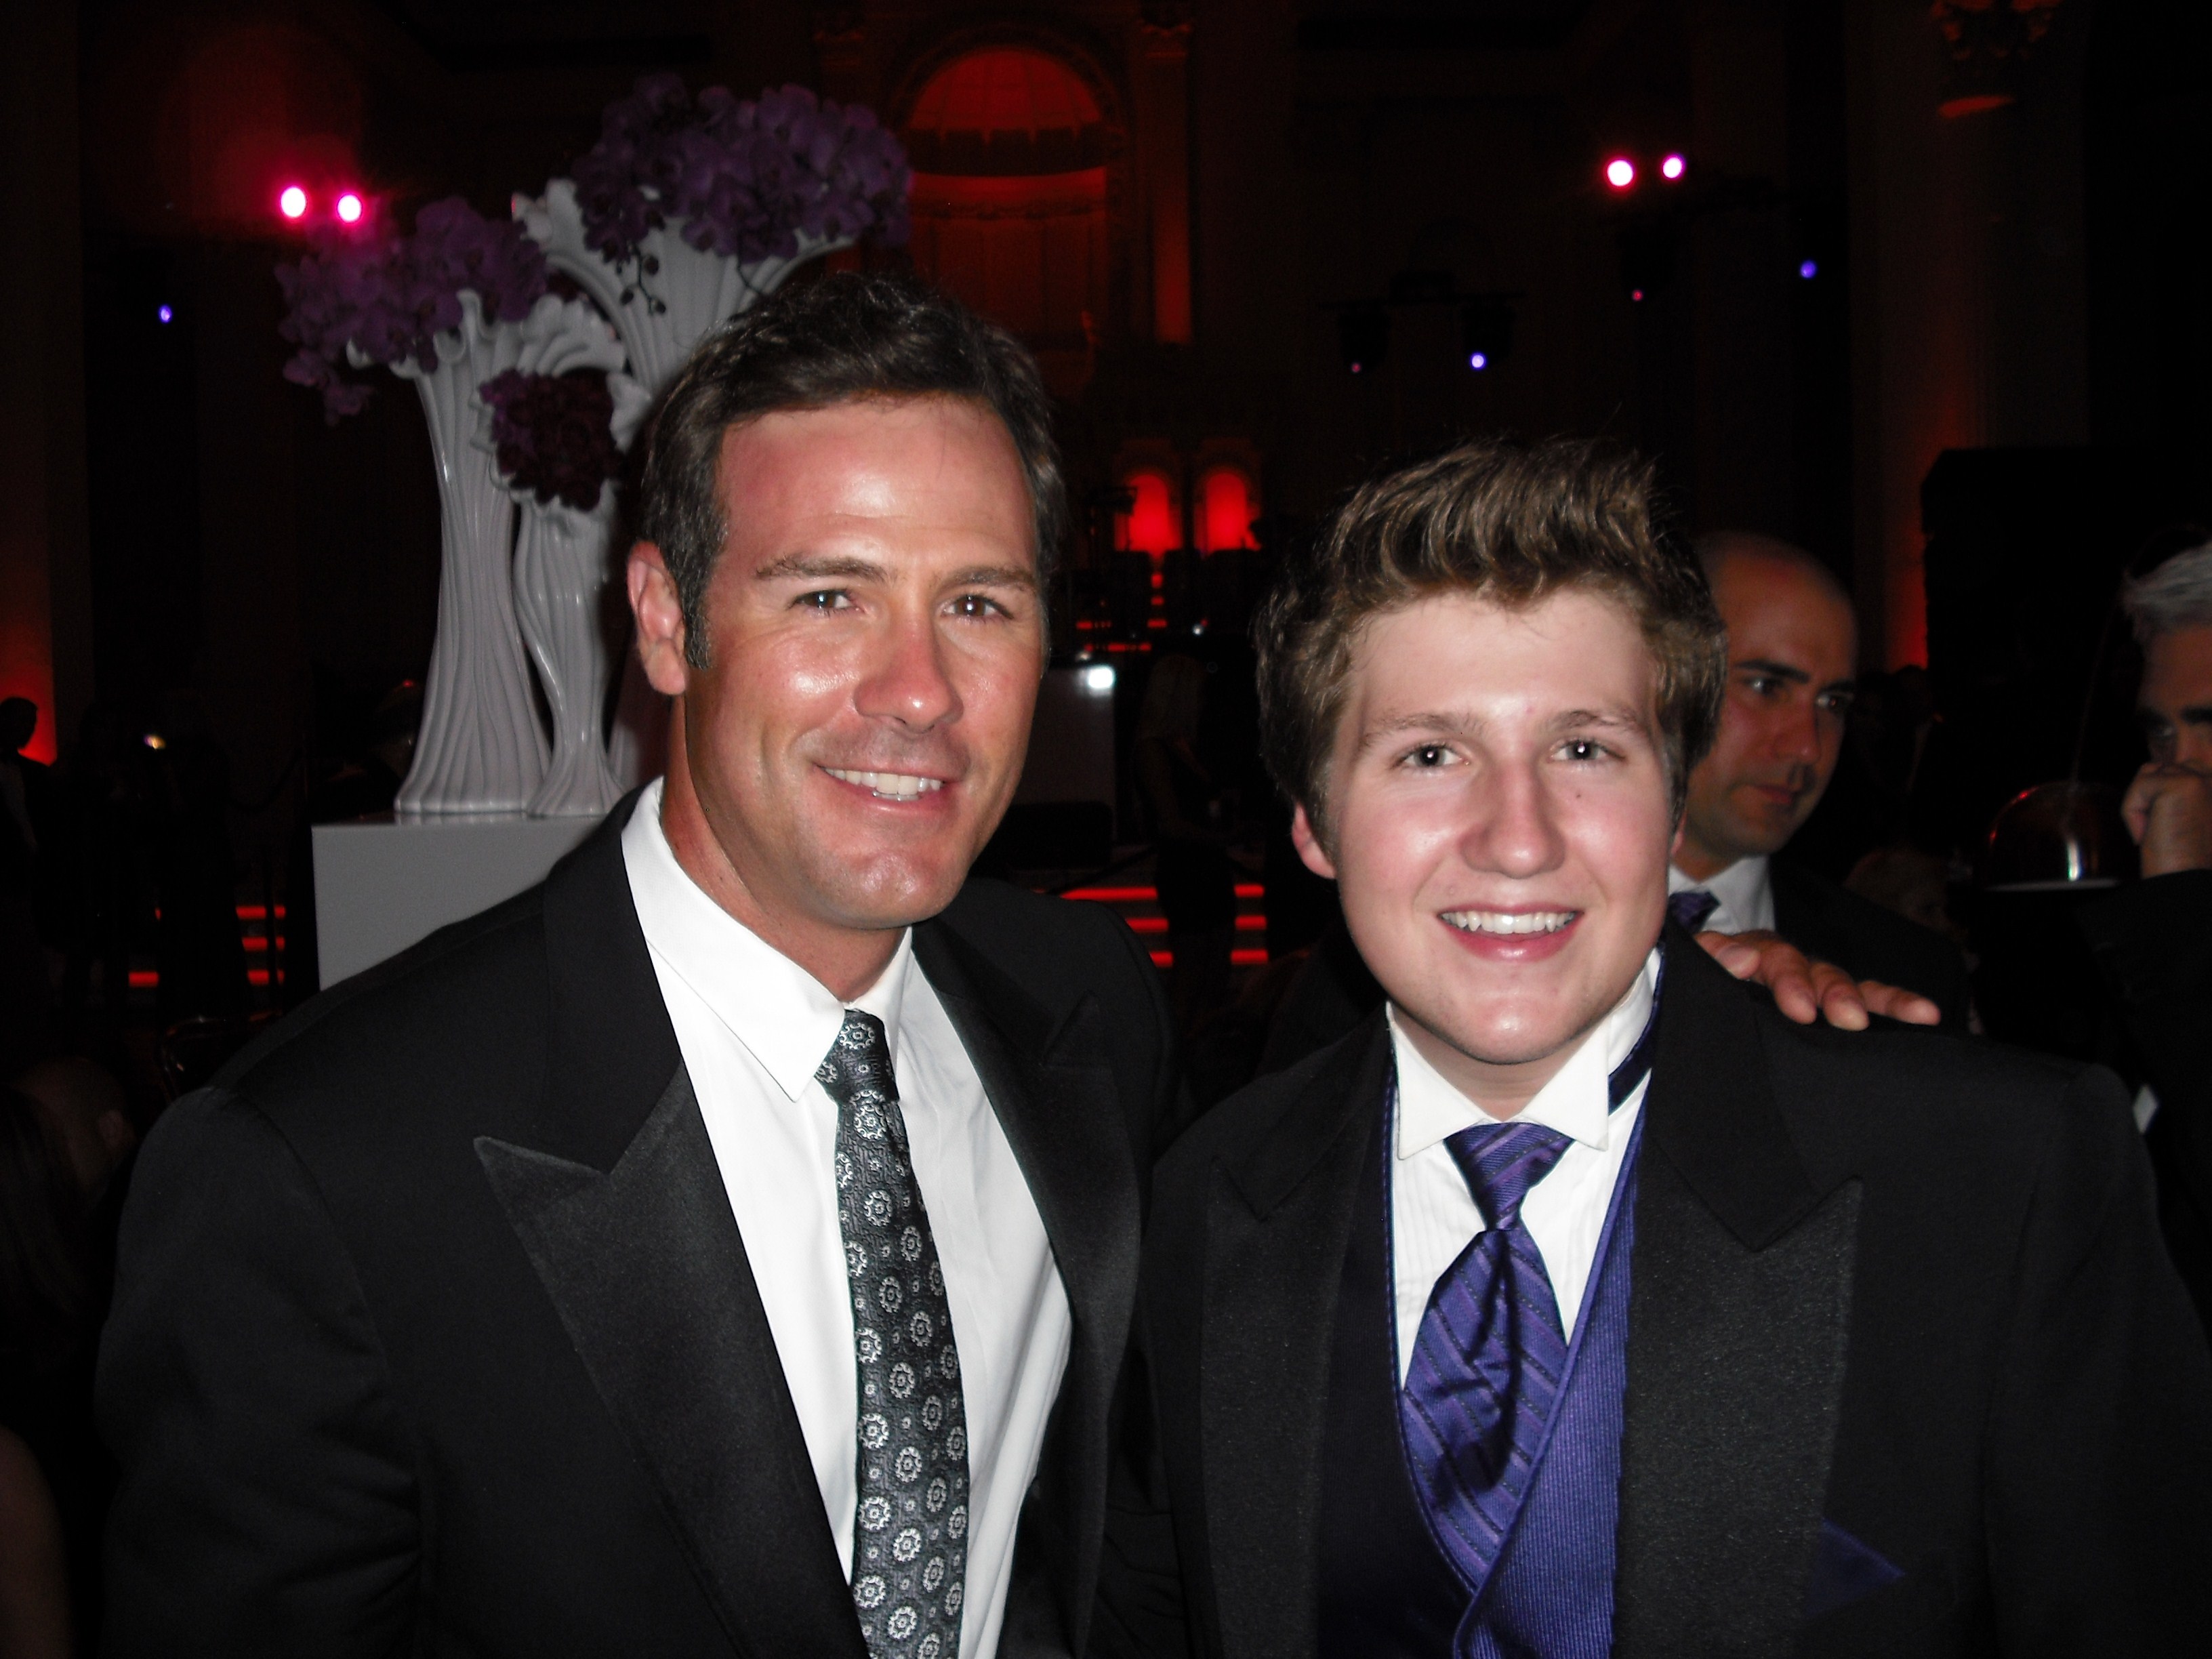 David with The Insider's Chris Jacobs at Entertainment Tonight's Emmy After Party